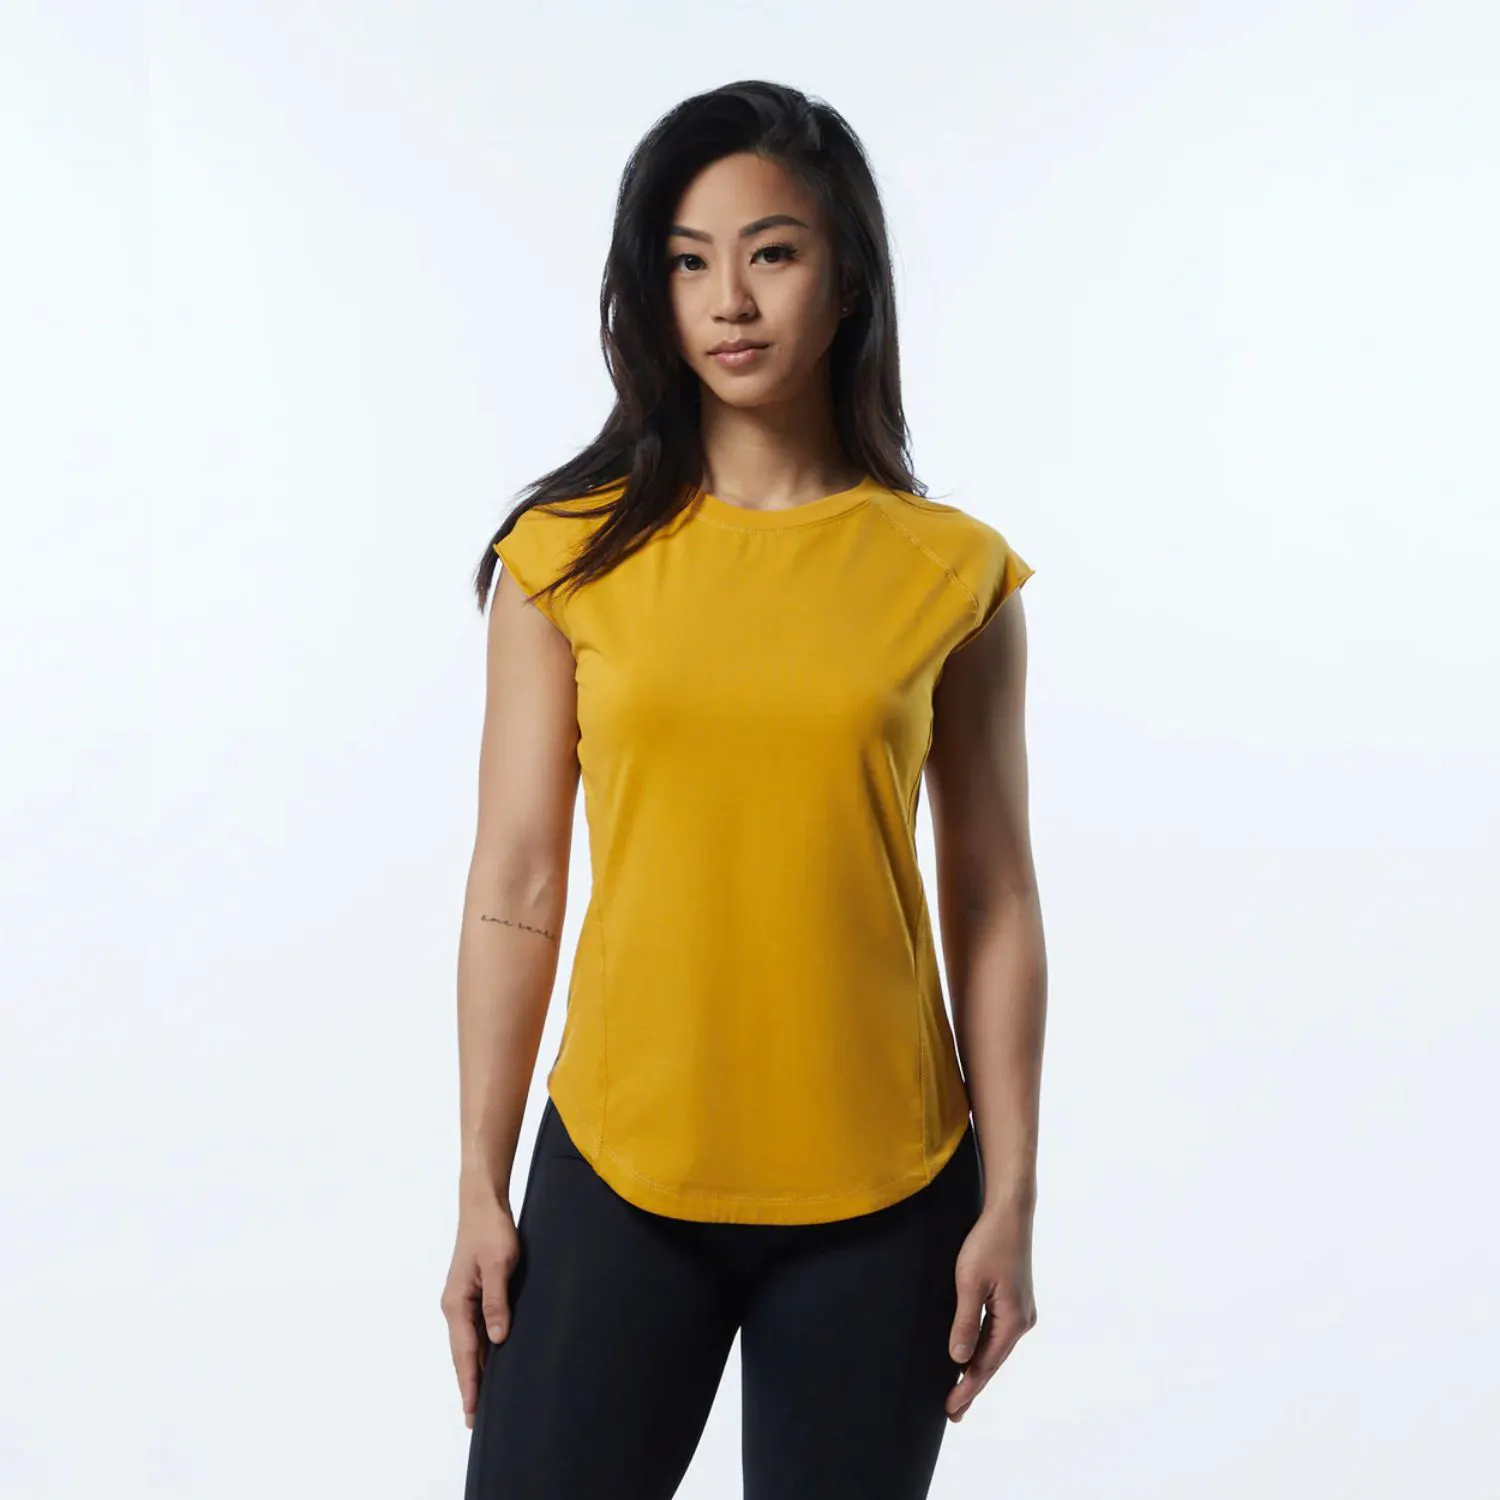 Performance Fit 95% Cotton 5% Spandex Fitted Cap Sleeves Raglan Shaped Crew Neckline Women Exotic Yellow T-Shirt with Scoop Hem